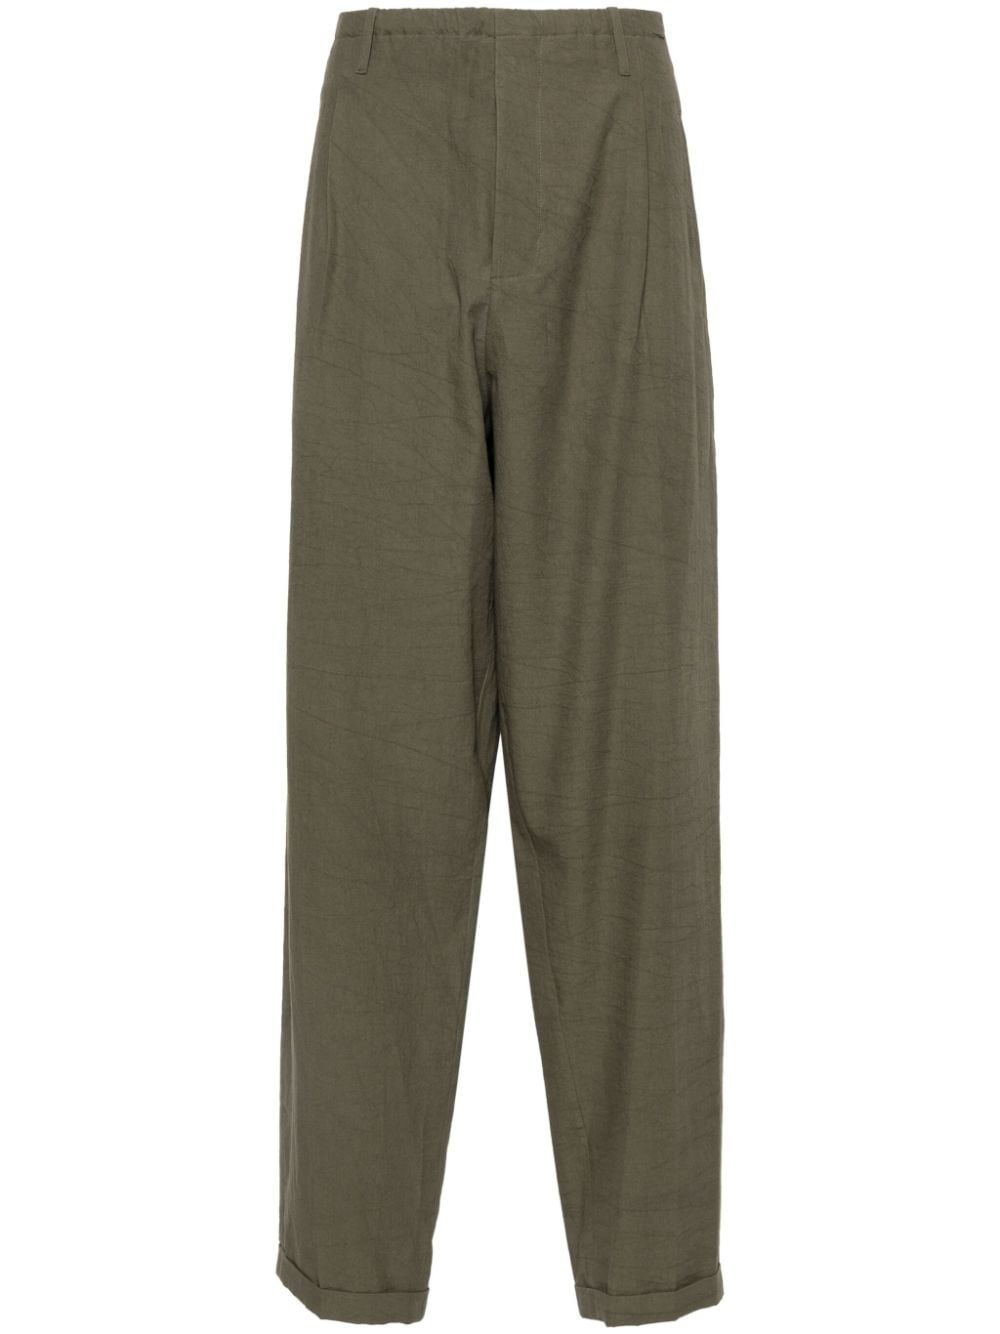 Magliano New People's twill trousers - Verde